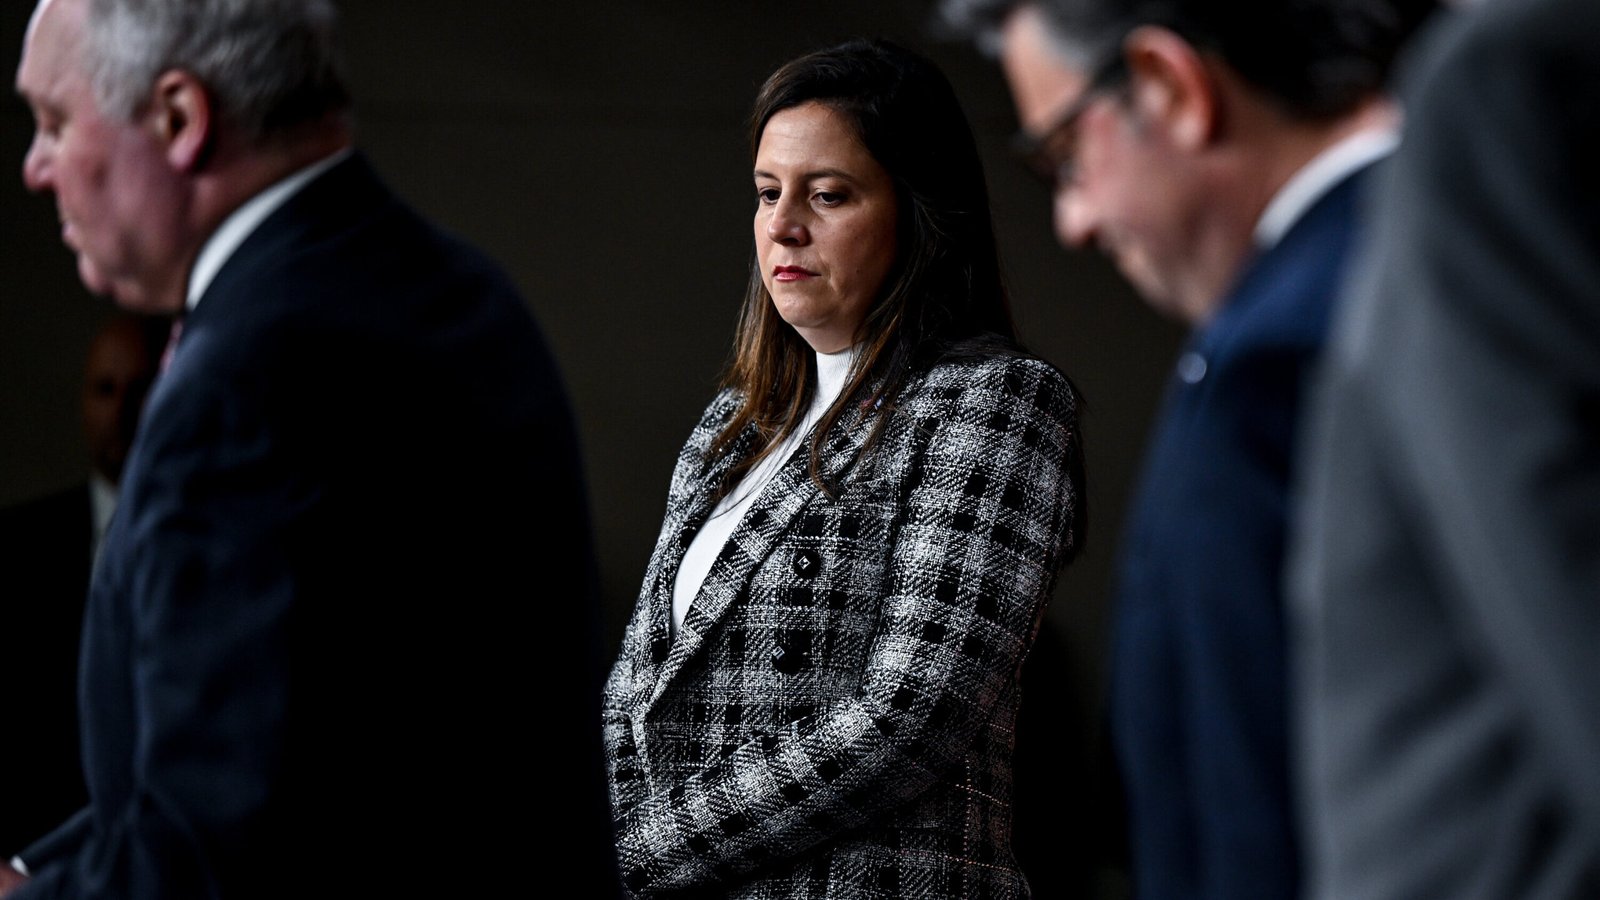 Stefanik wants ‘consequences’ for colleges over antisemitism after her questions go viral